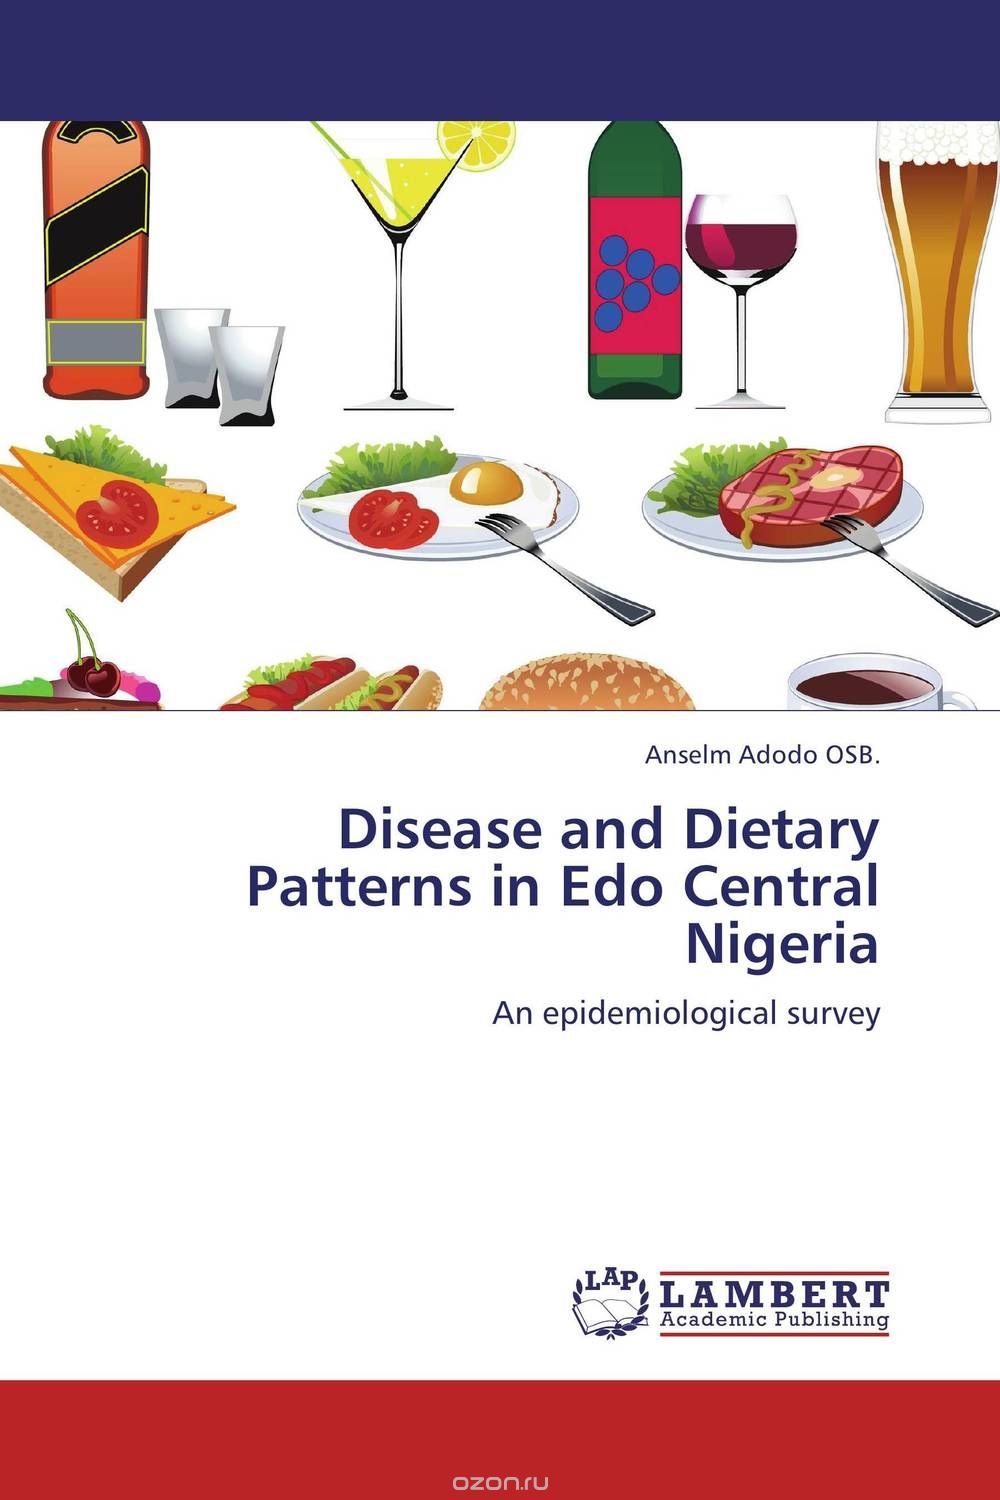 Disease and Dietary Patterns in Edo Central Nigeria